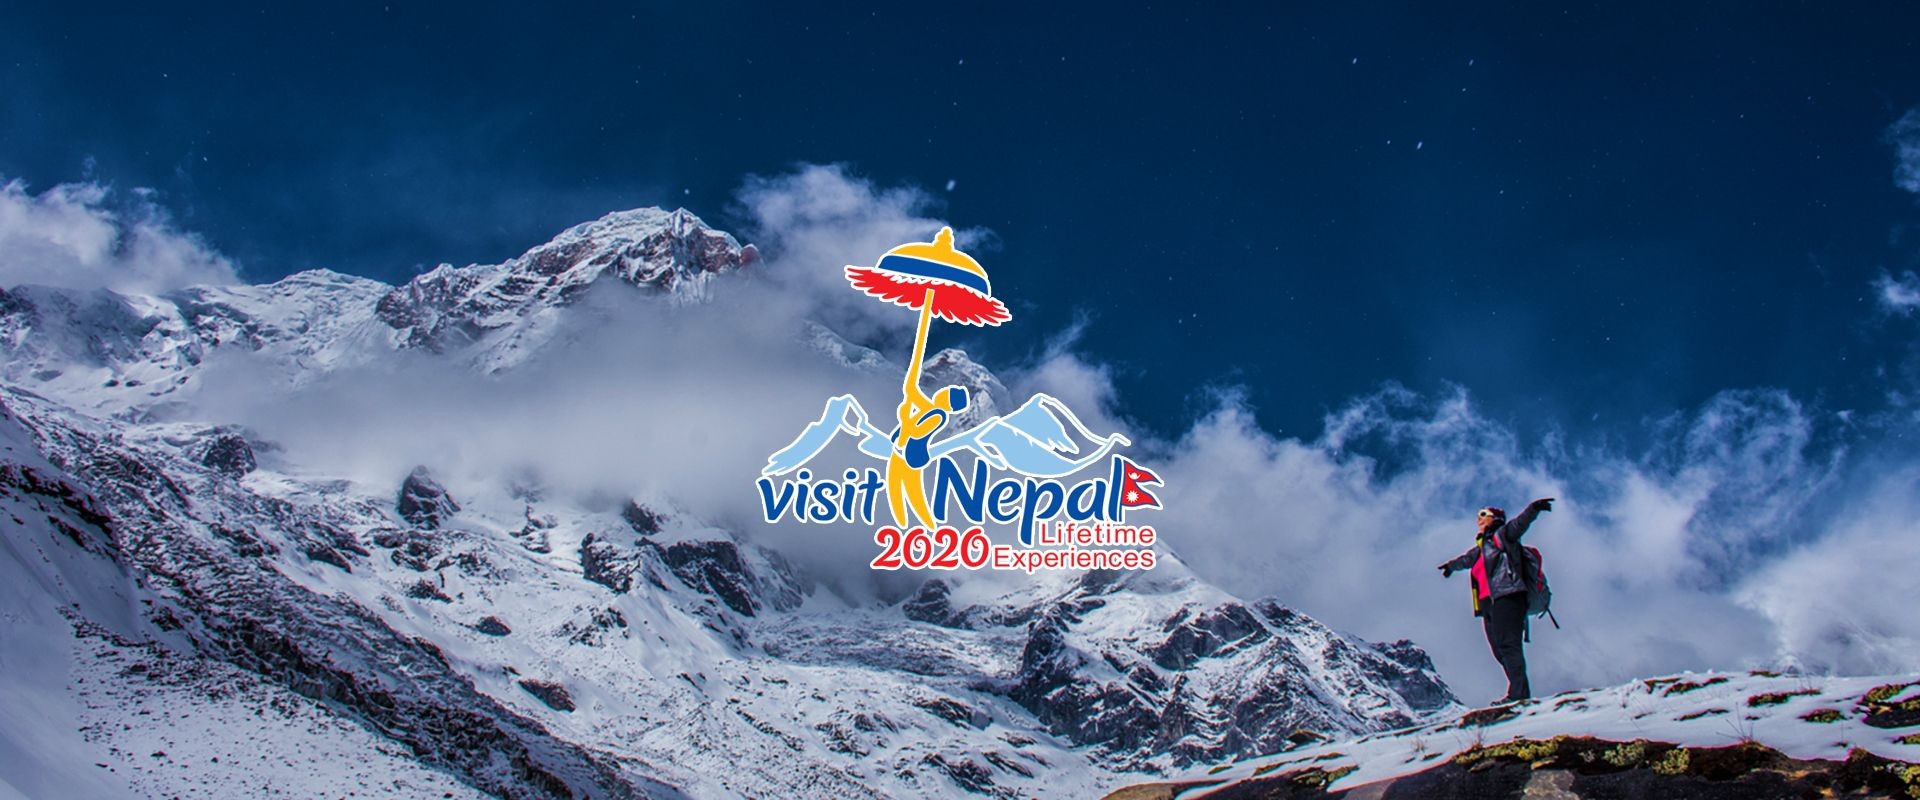 visit-nepal-year-2020-ntb-dmo-site-banner